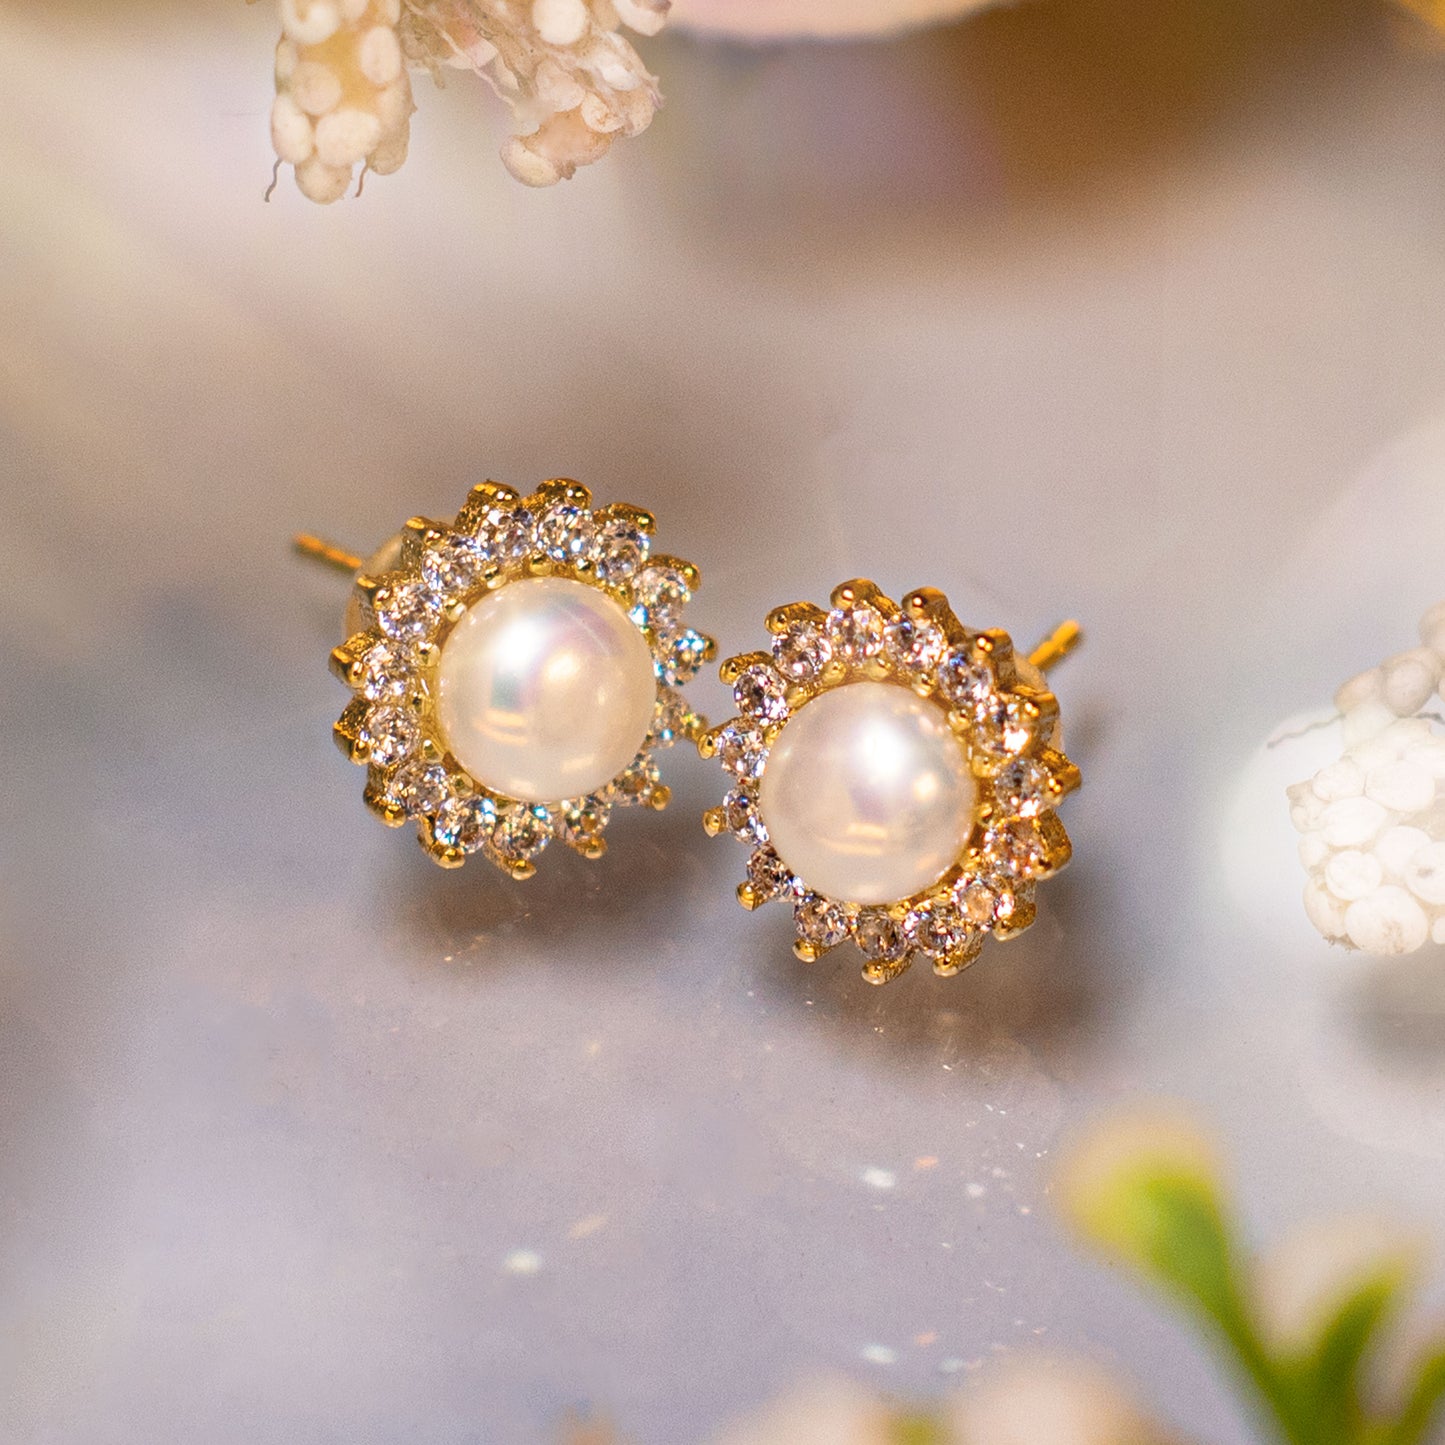 Peculiar Natural Baroque Pearls 18k Gold Plated Milano Earrings - Jewelry